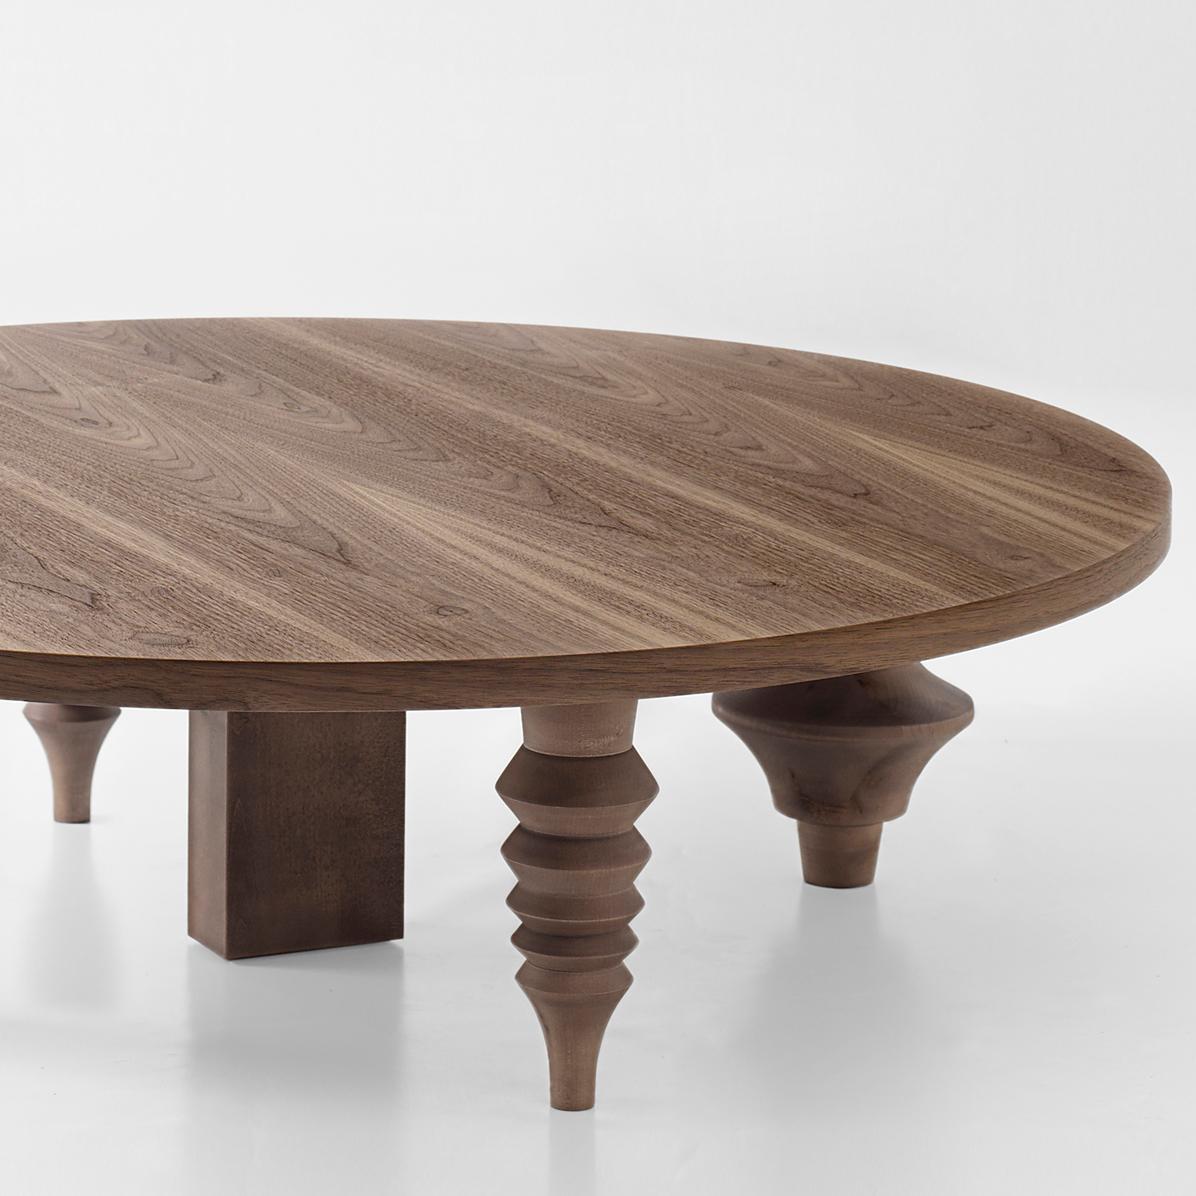 Modern Jaime Hayon Rounded Multi Leg Low Table by BD Barcelona